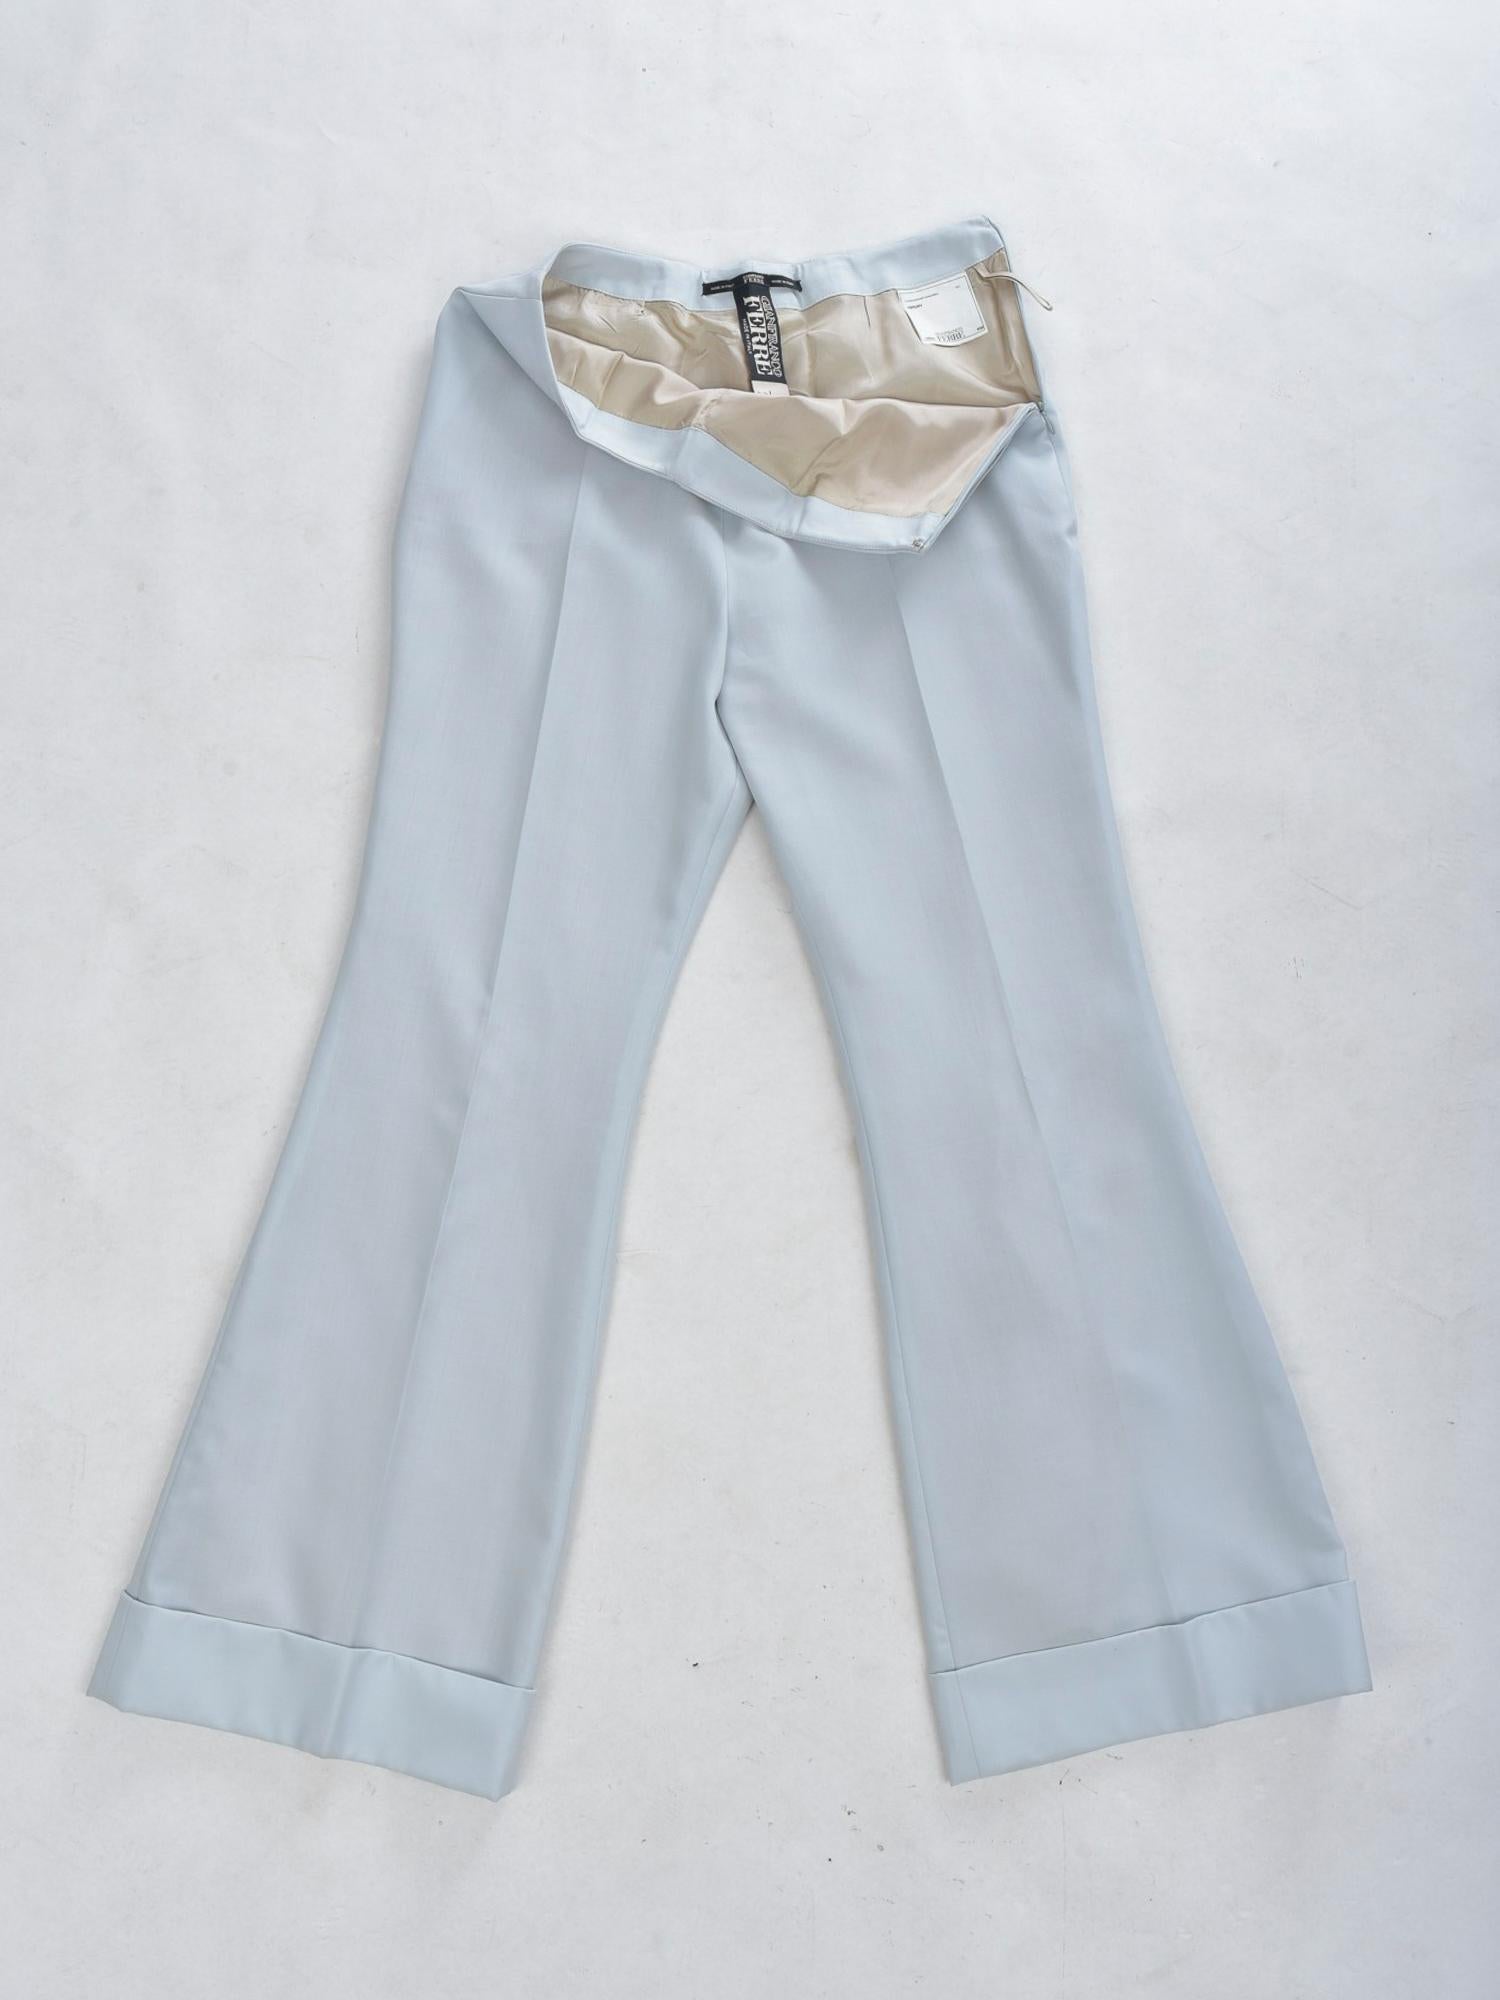 Gray An Ice blue Tuxedo Pant Suit by Gianfranco Ferre - Italy Circa 1995 - 2000 For Sale